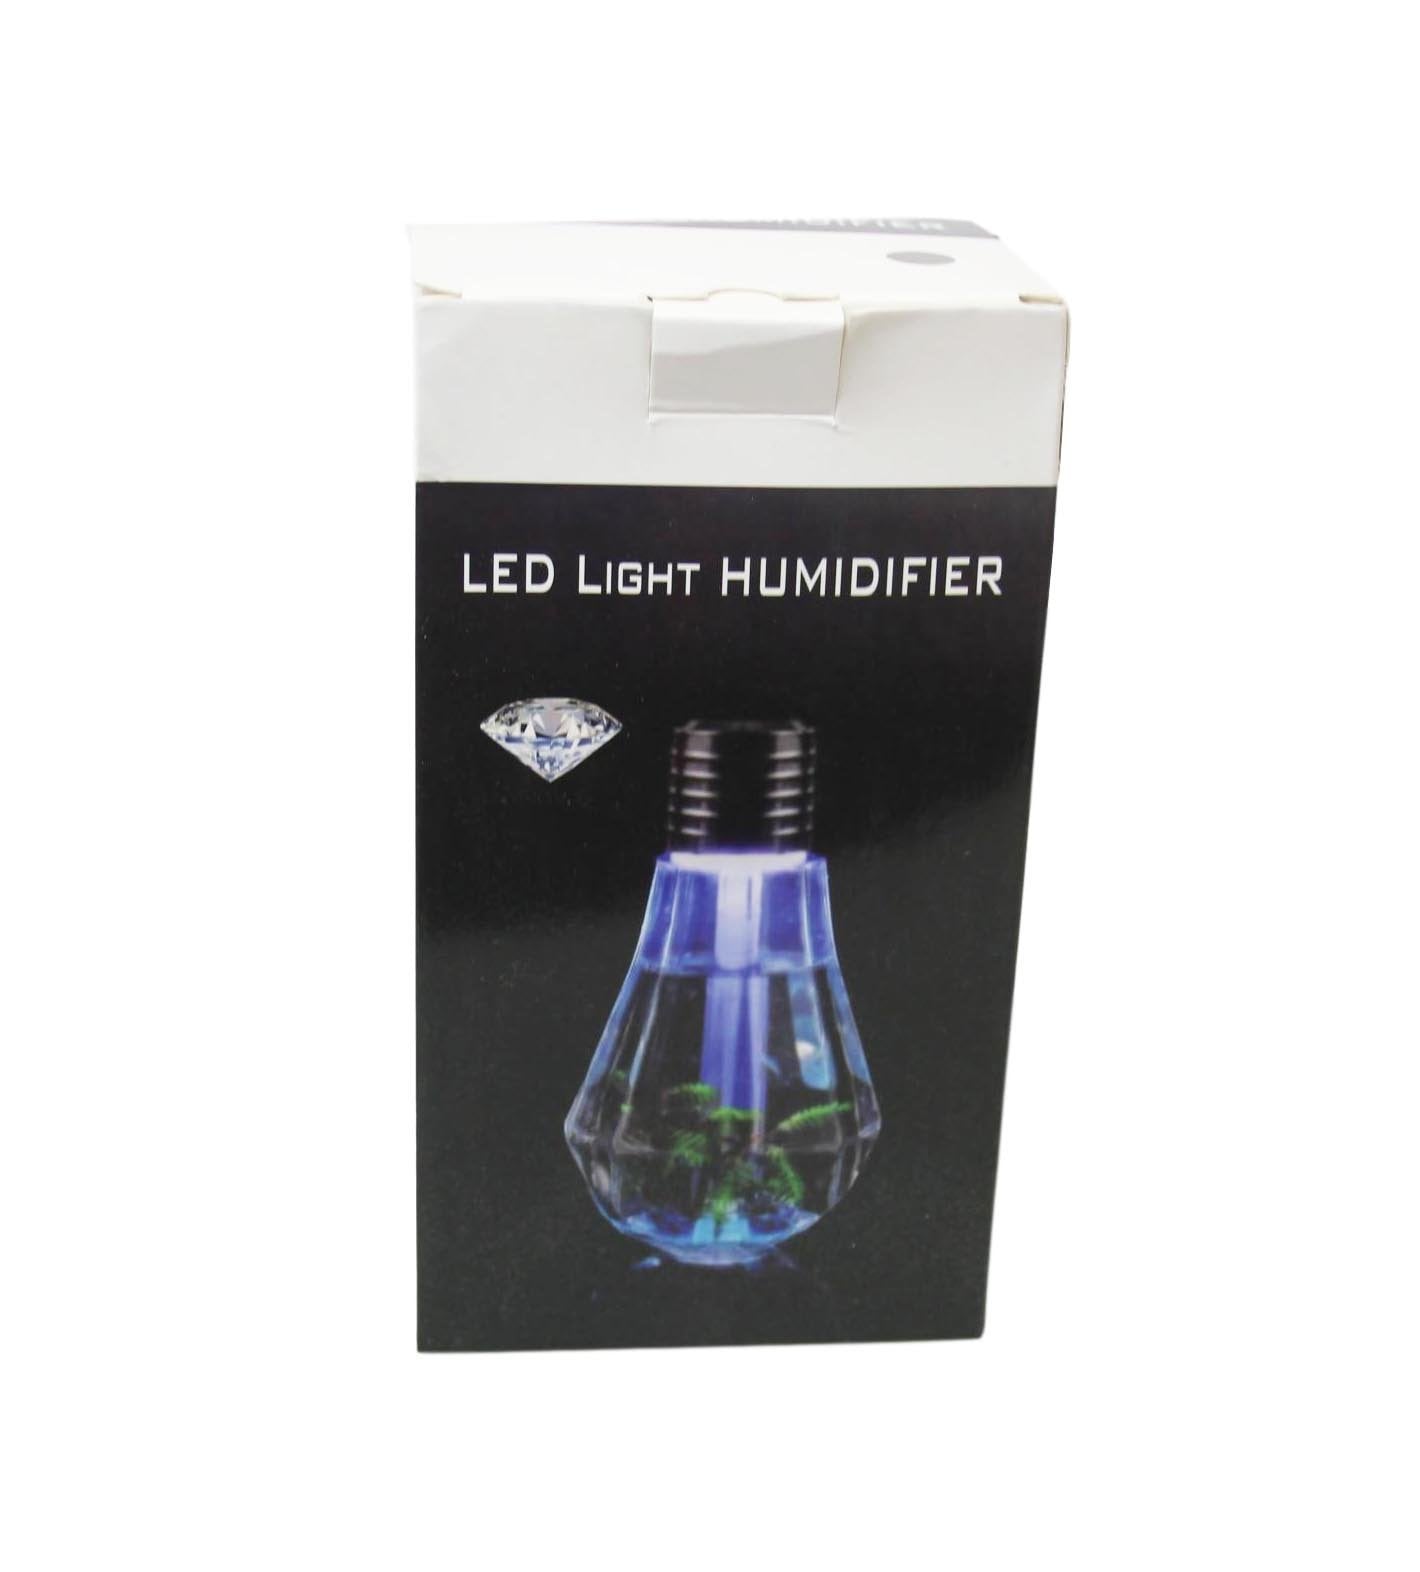 LED Light Humidifier Indoor USB Cable Light Bulb 6 Hours Running Time 6517 (Parcel Rate)